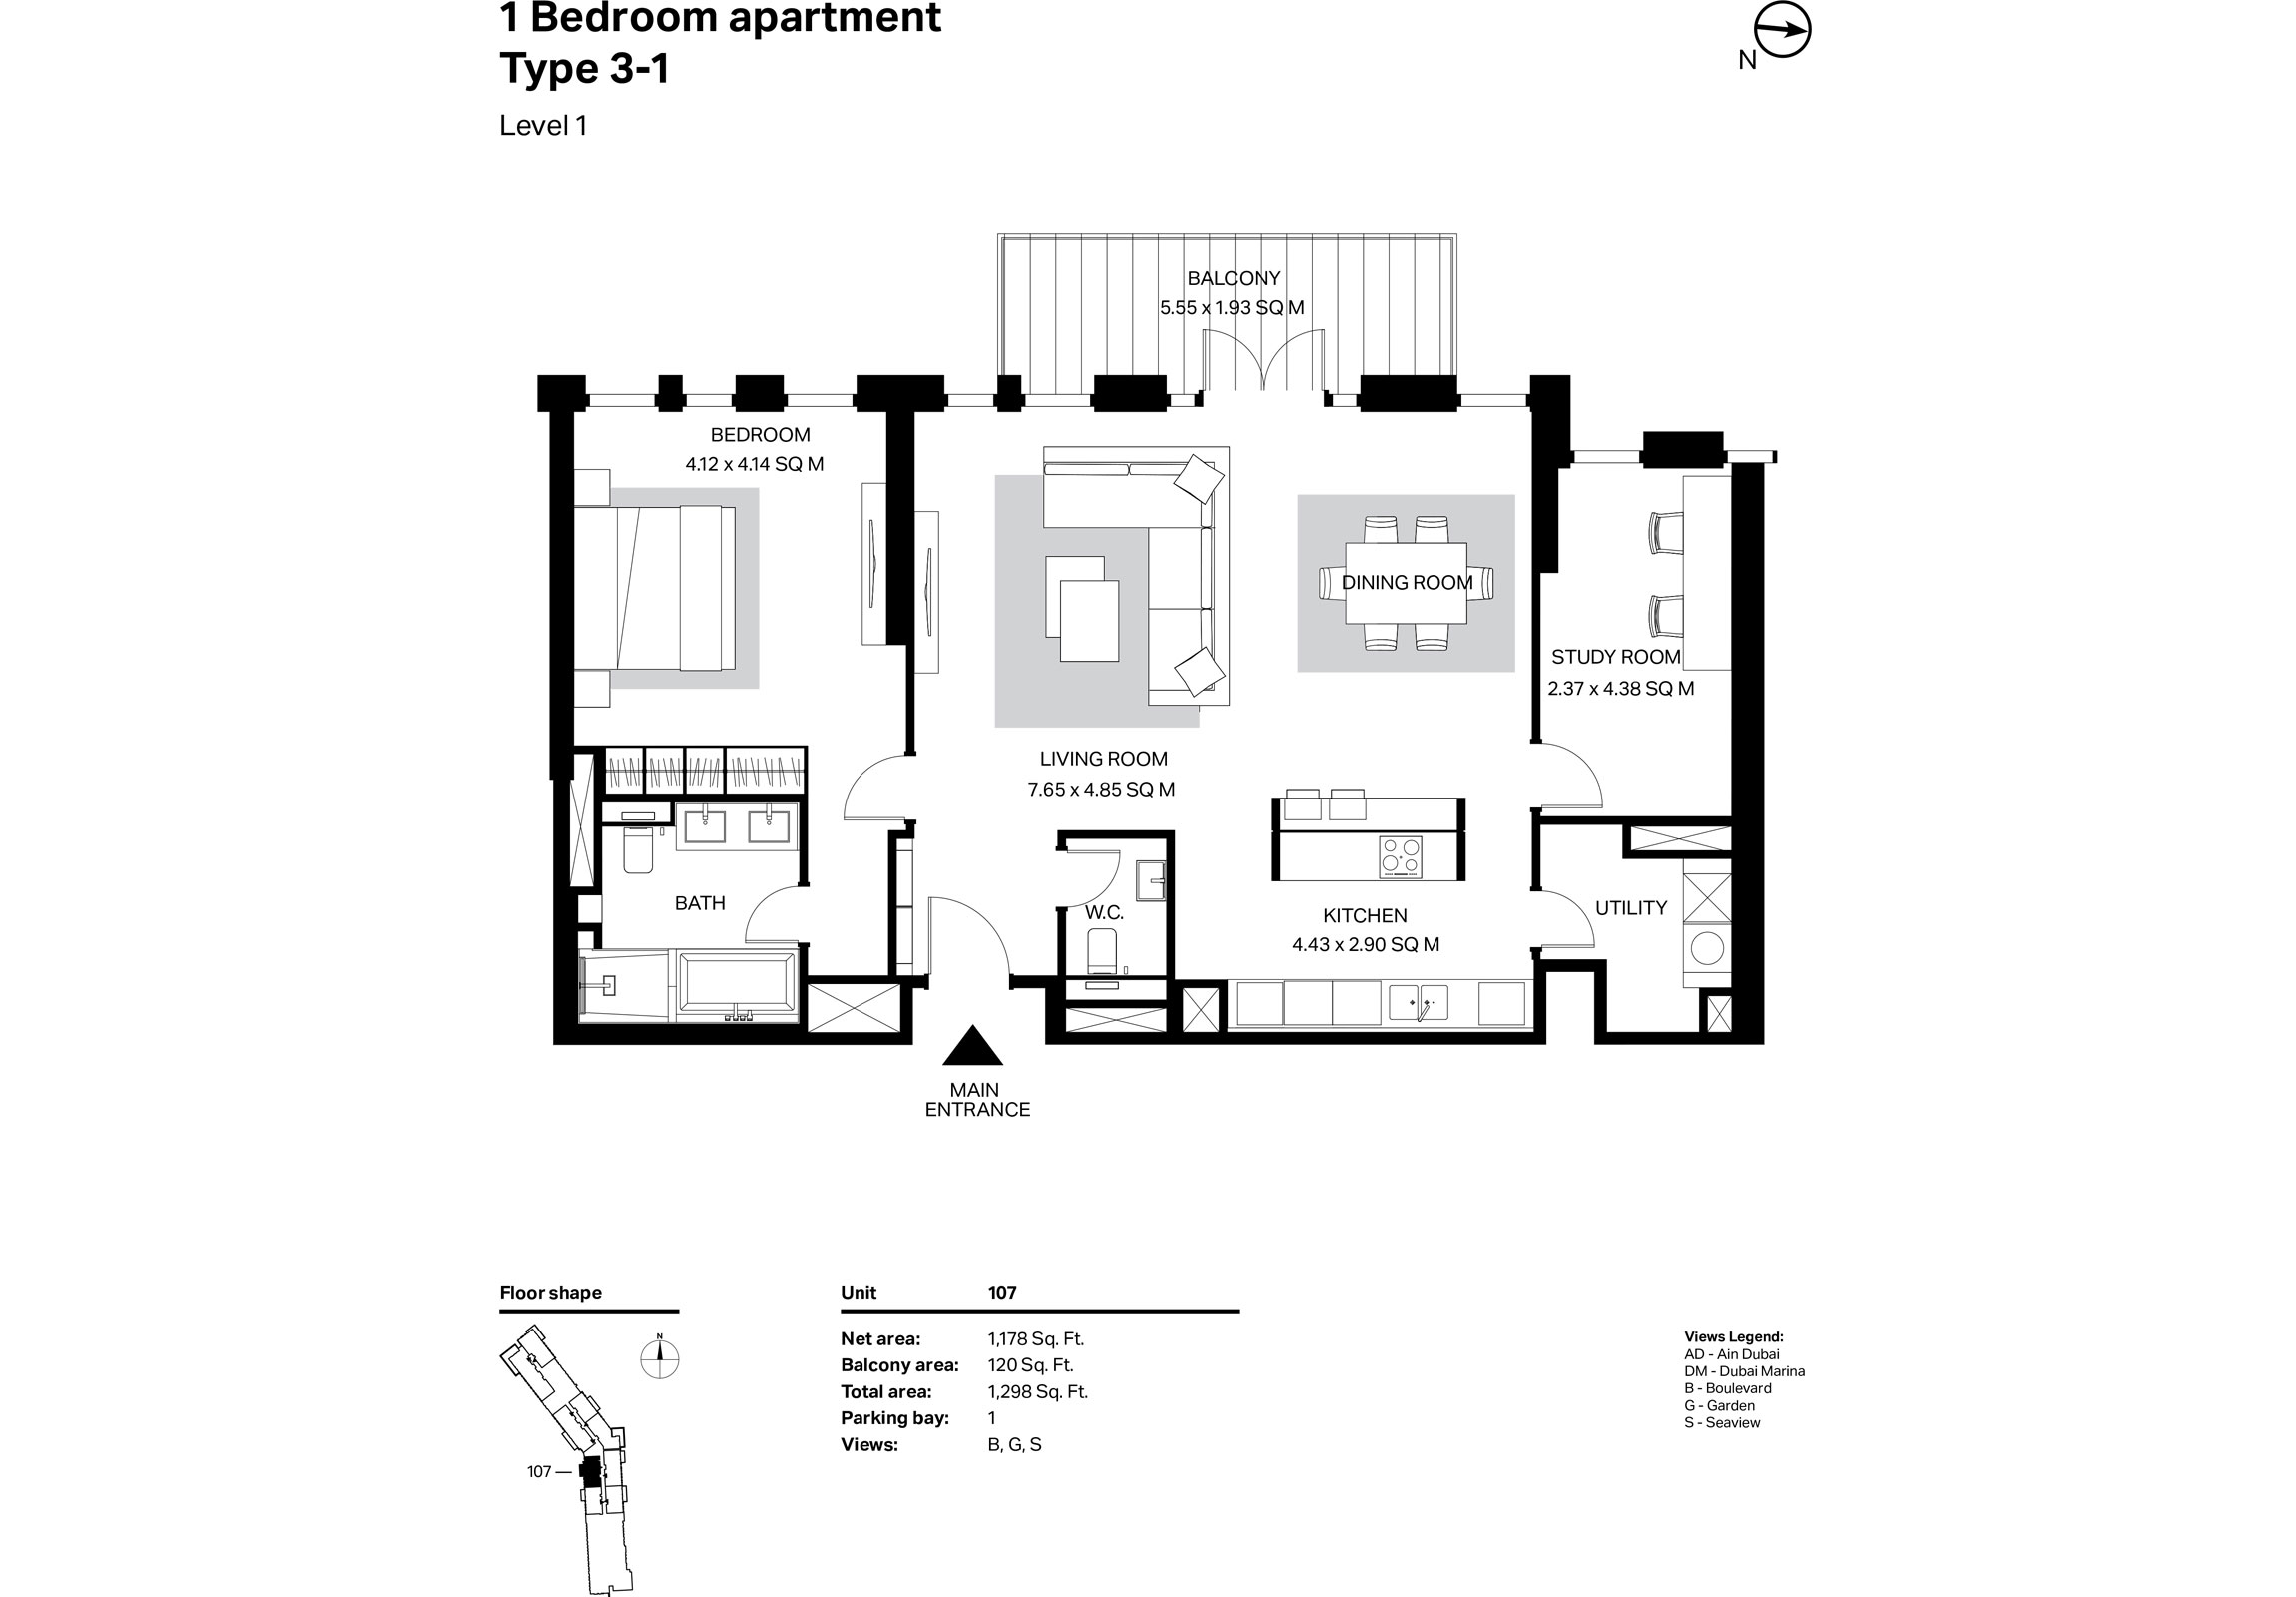 Building 2 - 1 Bedroom Type 3-1 Level 1 Size 1298 sq ft